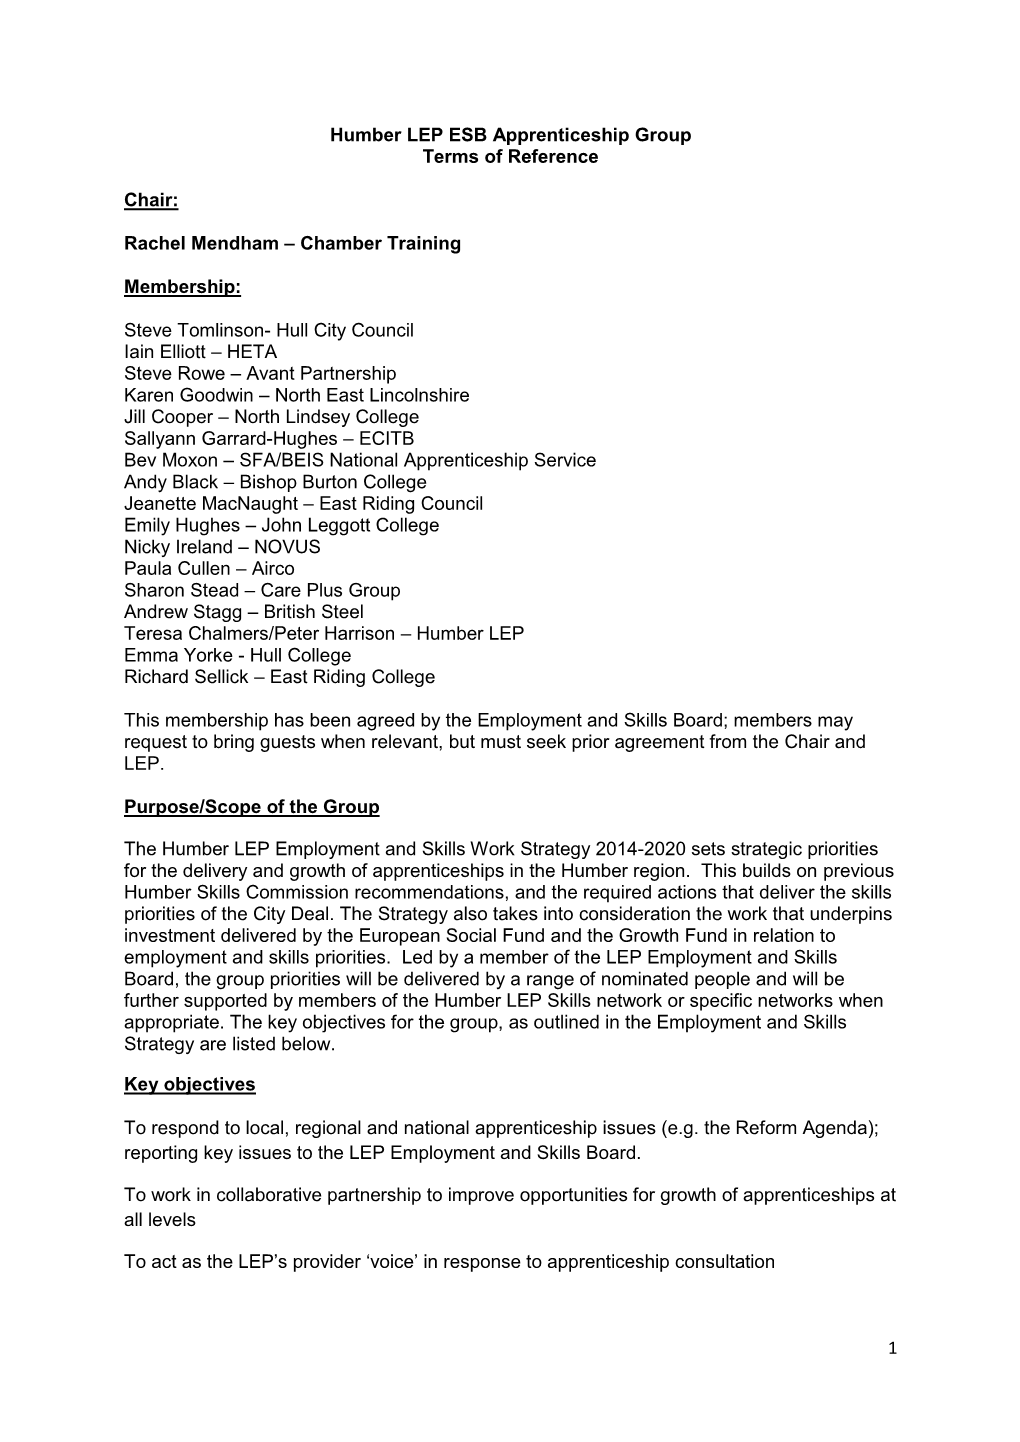 Humber LEP ESB Apprenticeship Group Terms of Reference